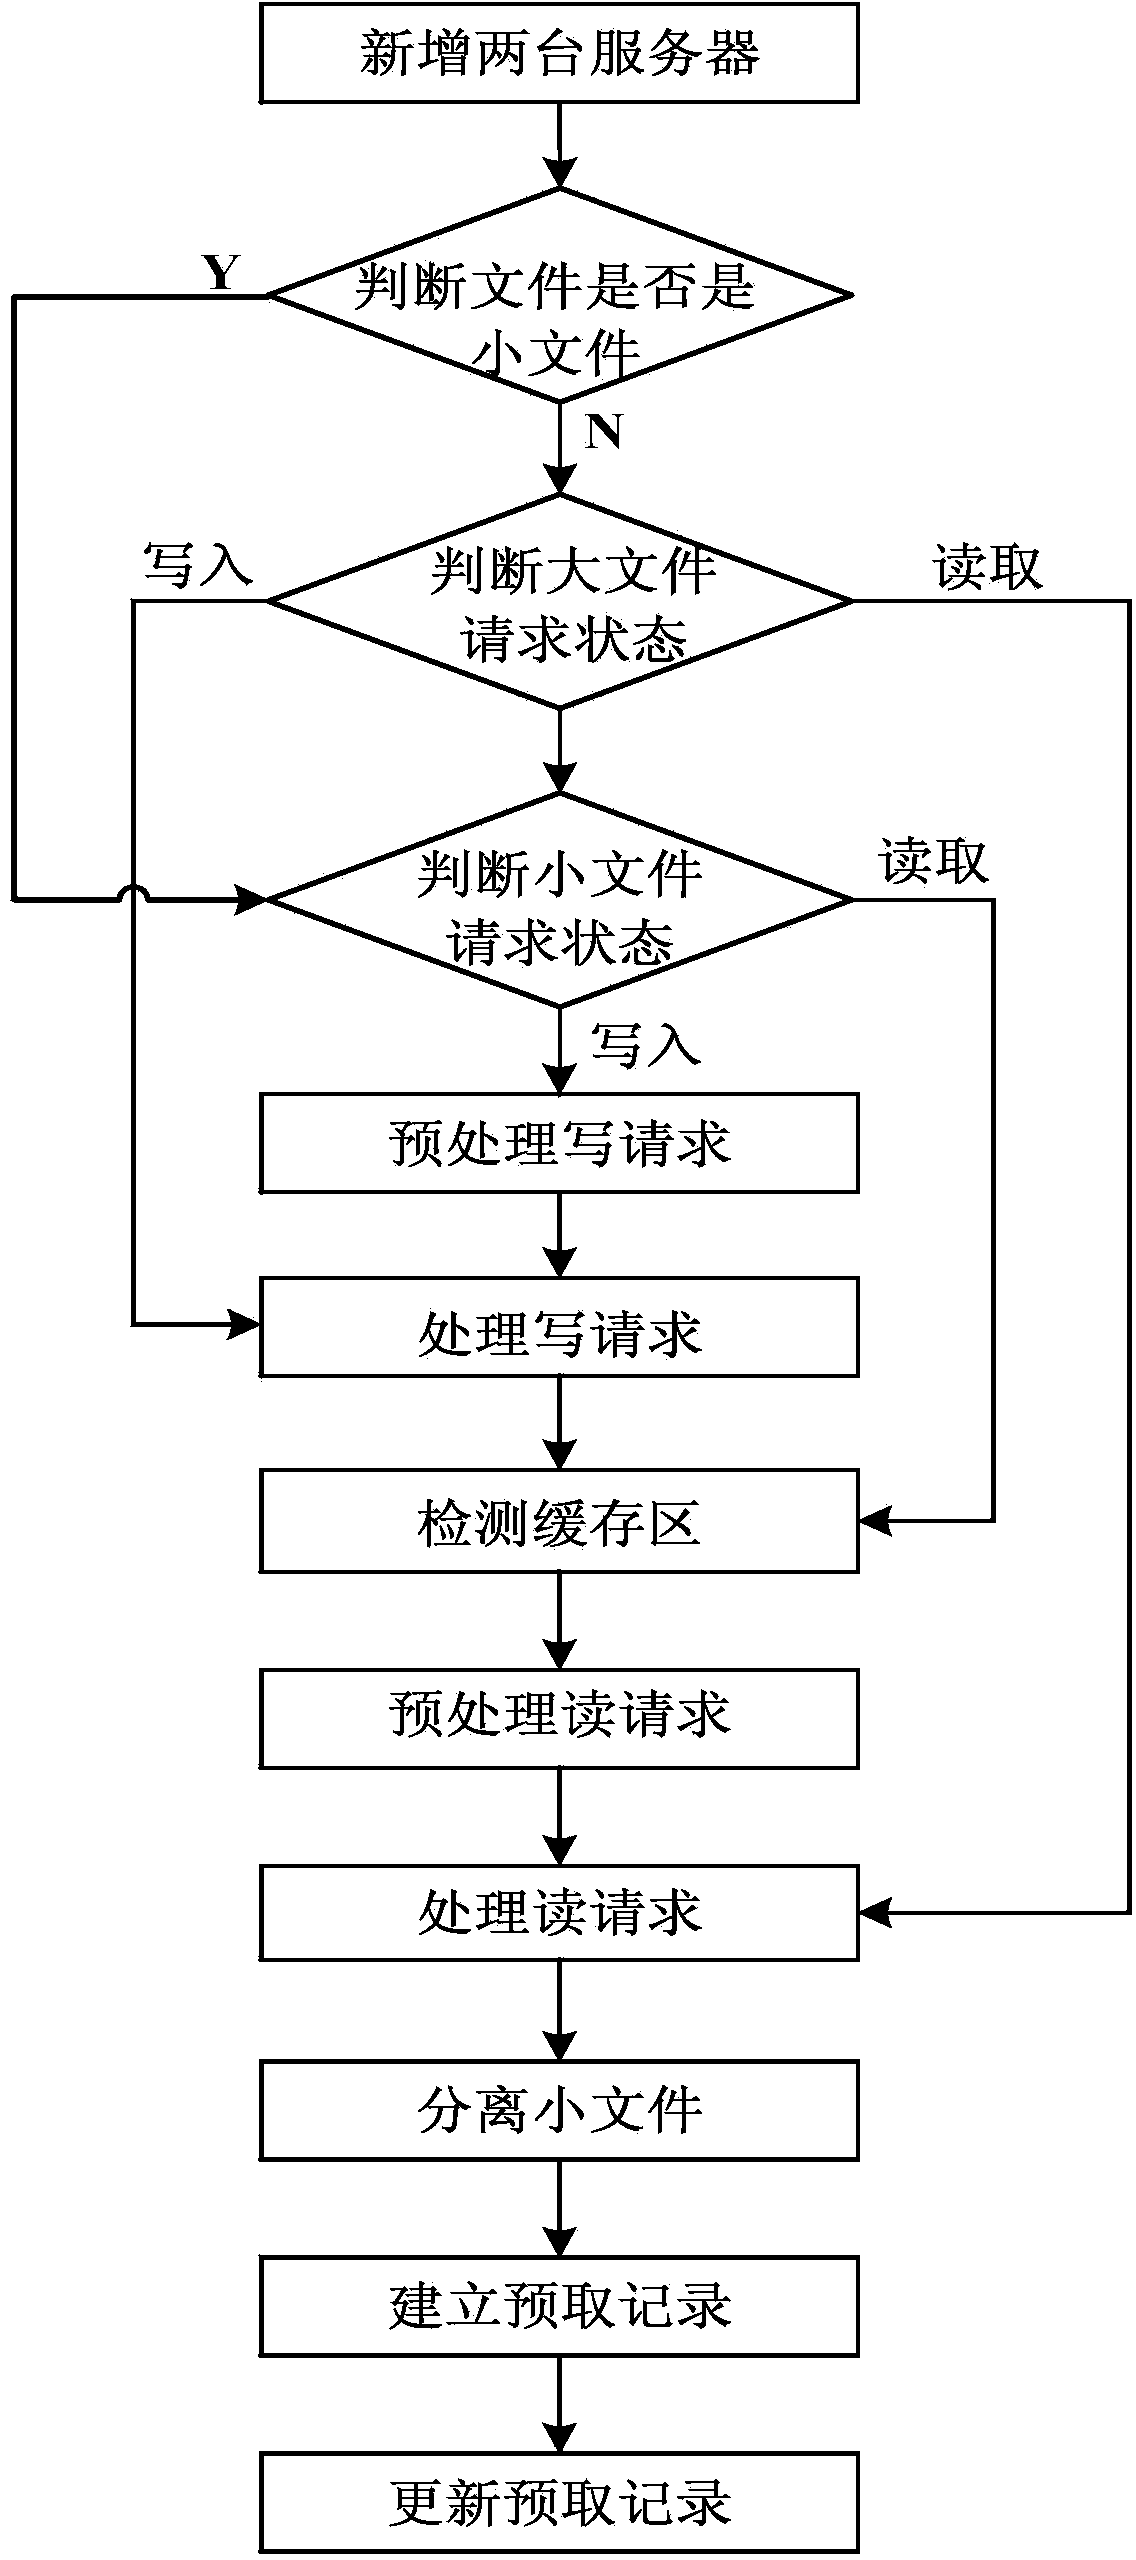 Small file storage method based on Hadoop distributed file system